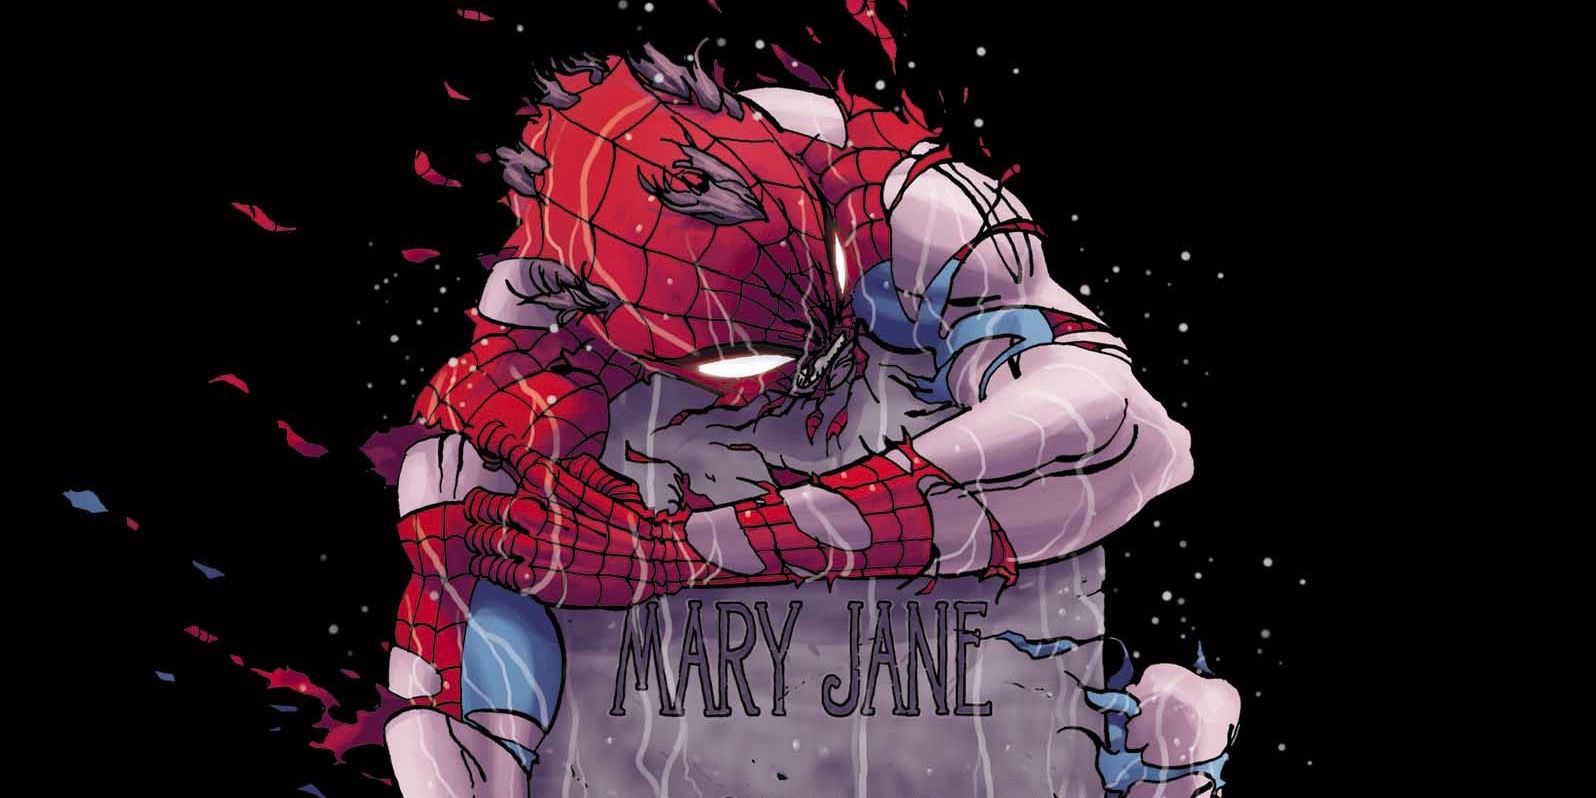 Spider-Man hugging Mary Jane's tombstone in Marvel Comics.